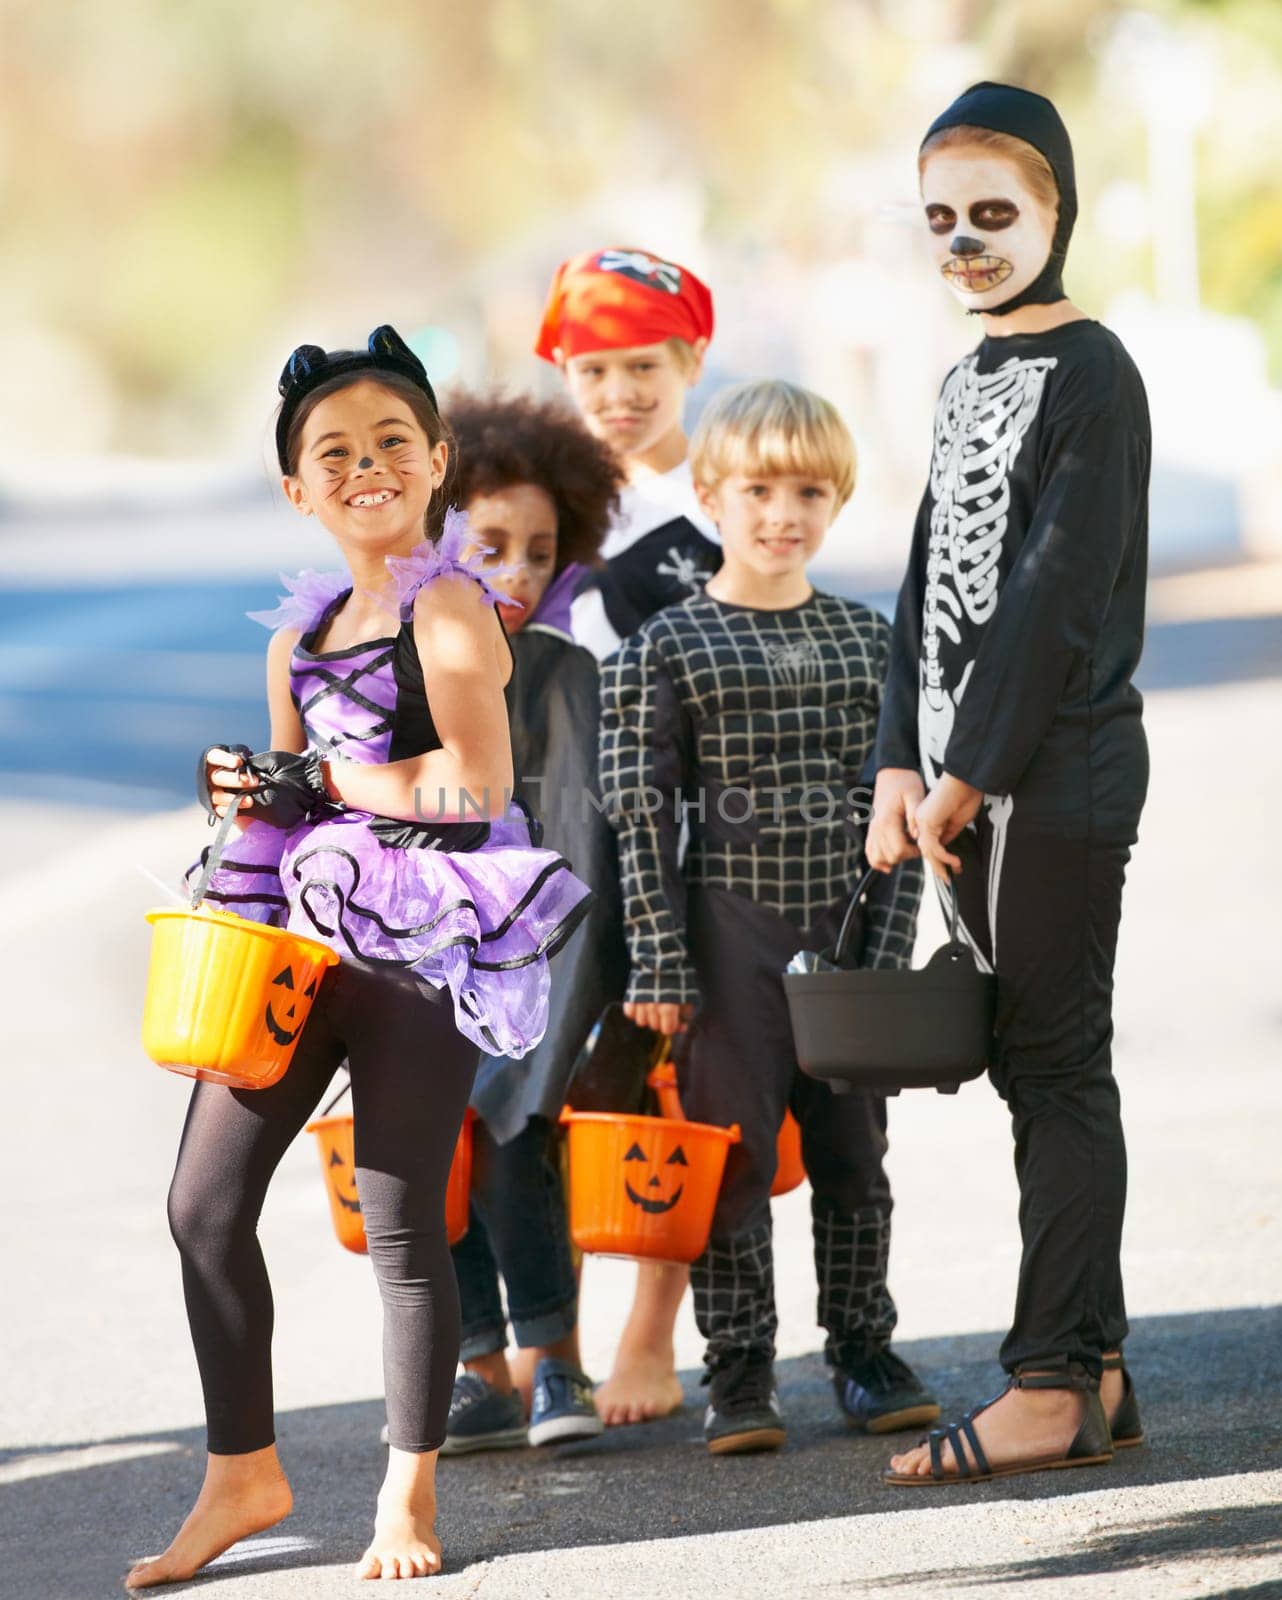 Children, halloween or trick and treat portrait outdoor in neighborhood for fun and dress up. A group of young kids together for happiness, celebrate holiday and diversity with candy or sweets by YuriArcurs